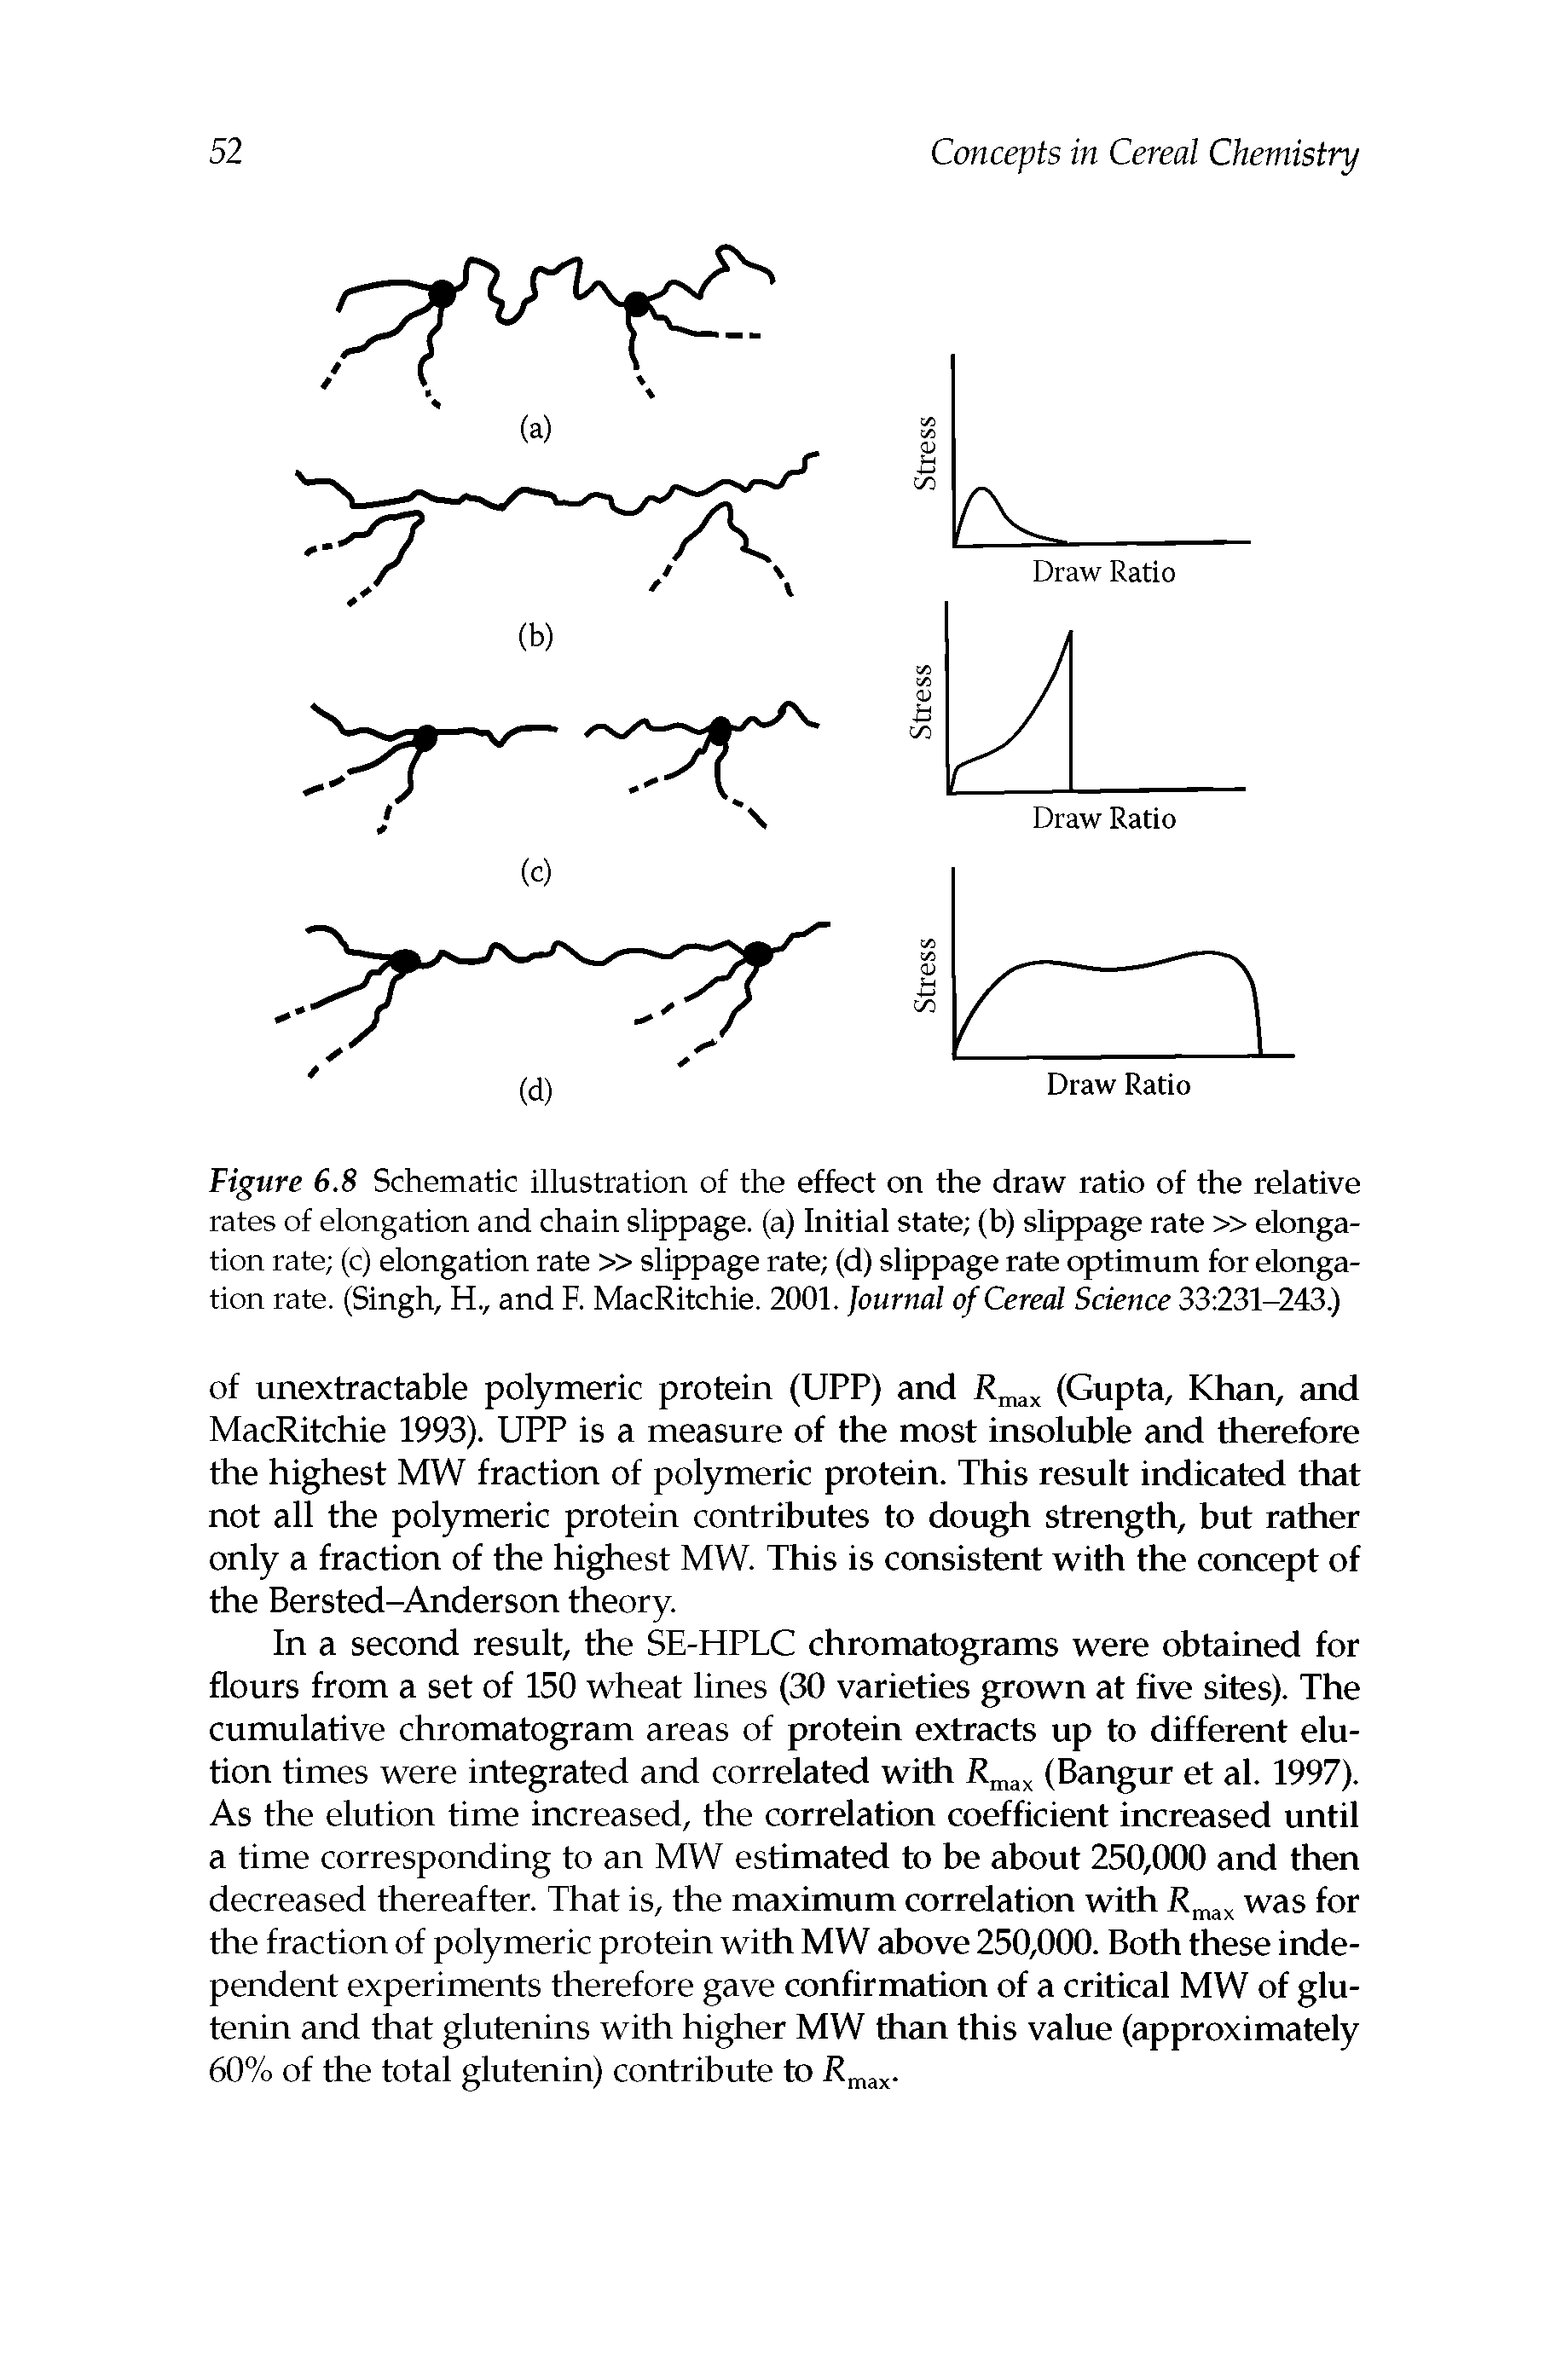 Figure 6.8 Schematic illustration of the effect on the draw ratio of the relative rates of elongation and chain slippage, (a) Initial state (b) slippage rate elongation rate (c) elongation rate slippage rate (d) slippage rate optimum for elongation rate. (Singh, H., and R MacRitchie. 2001. Journal of Cereal Science 33231-243.)...